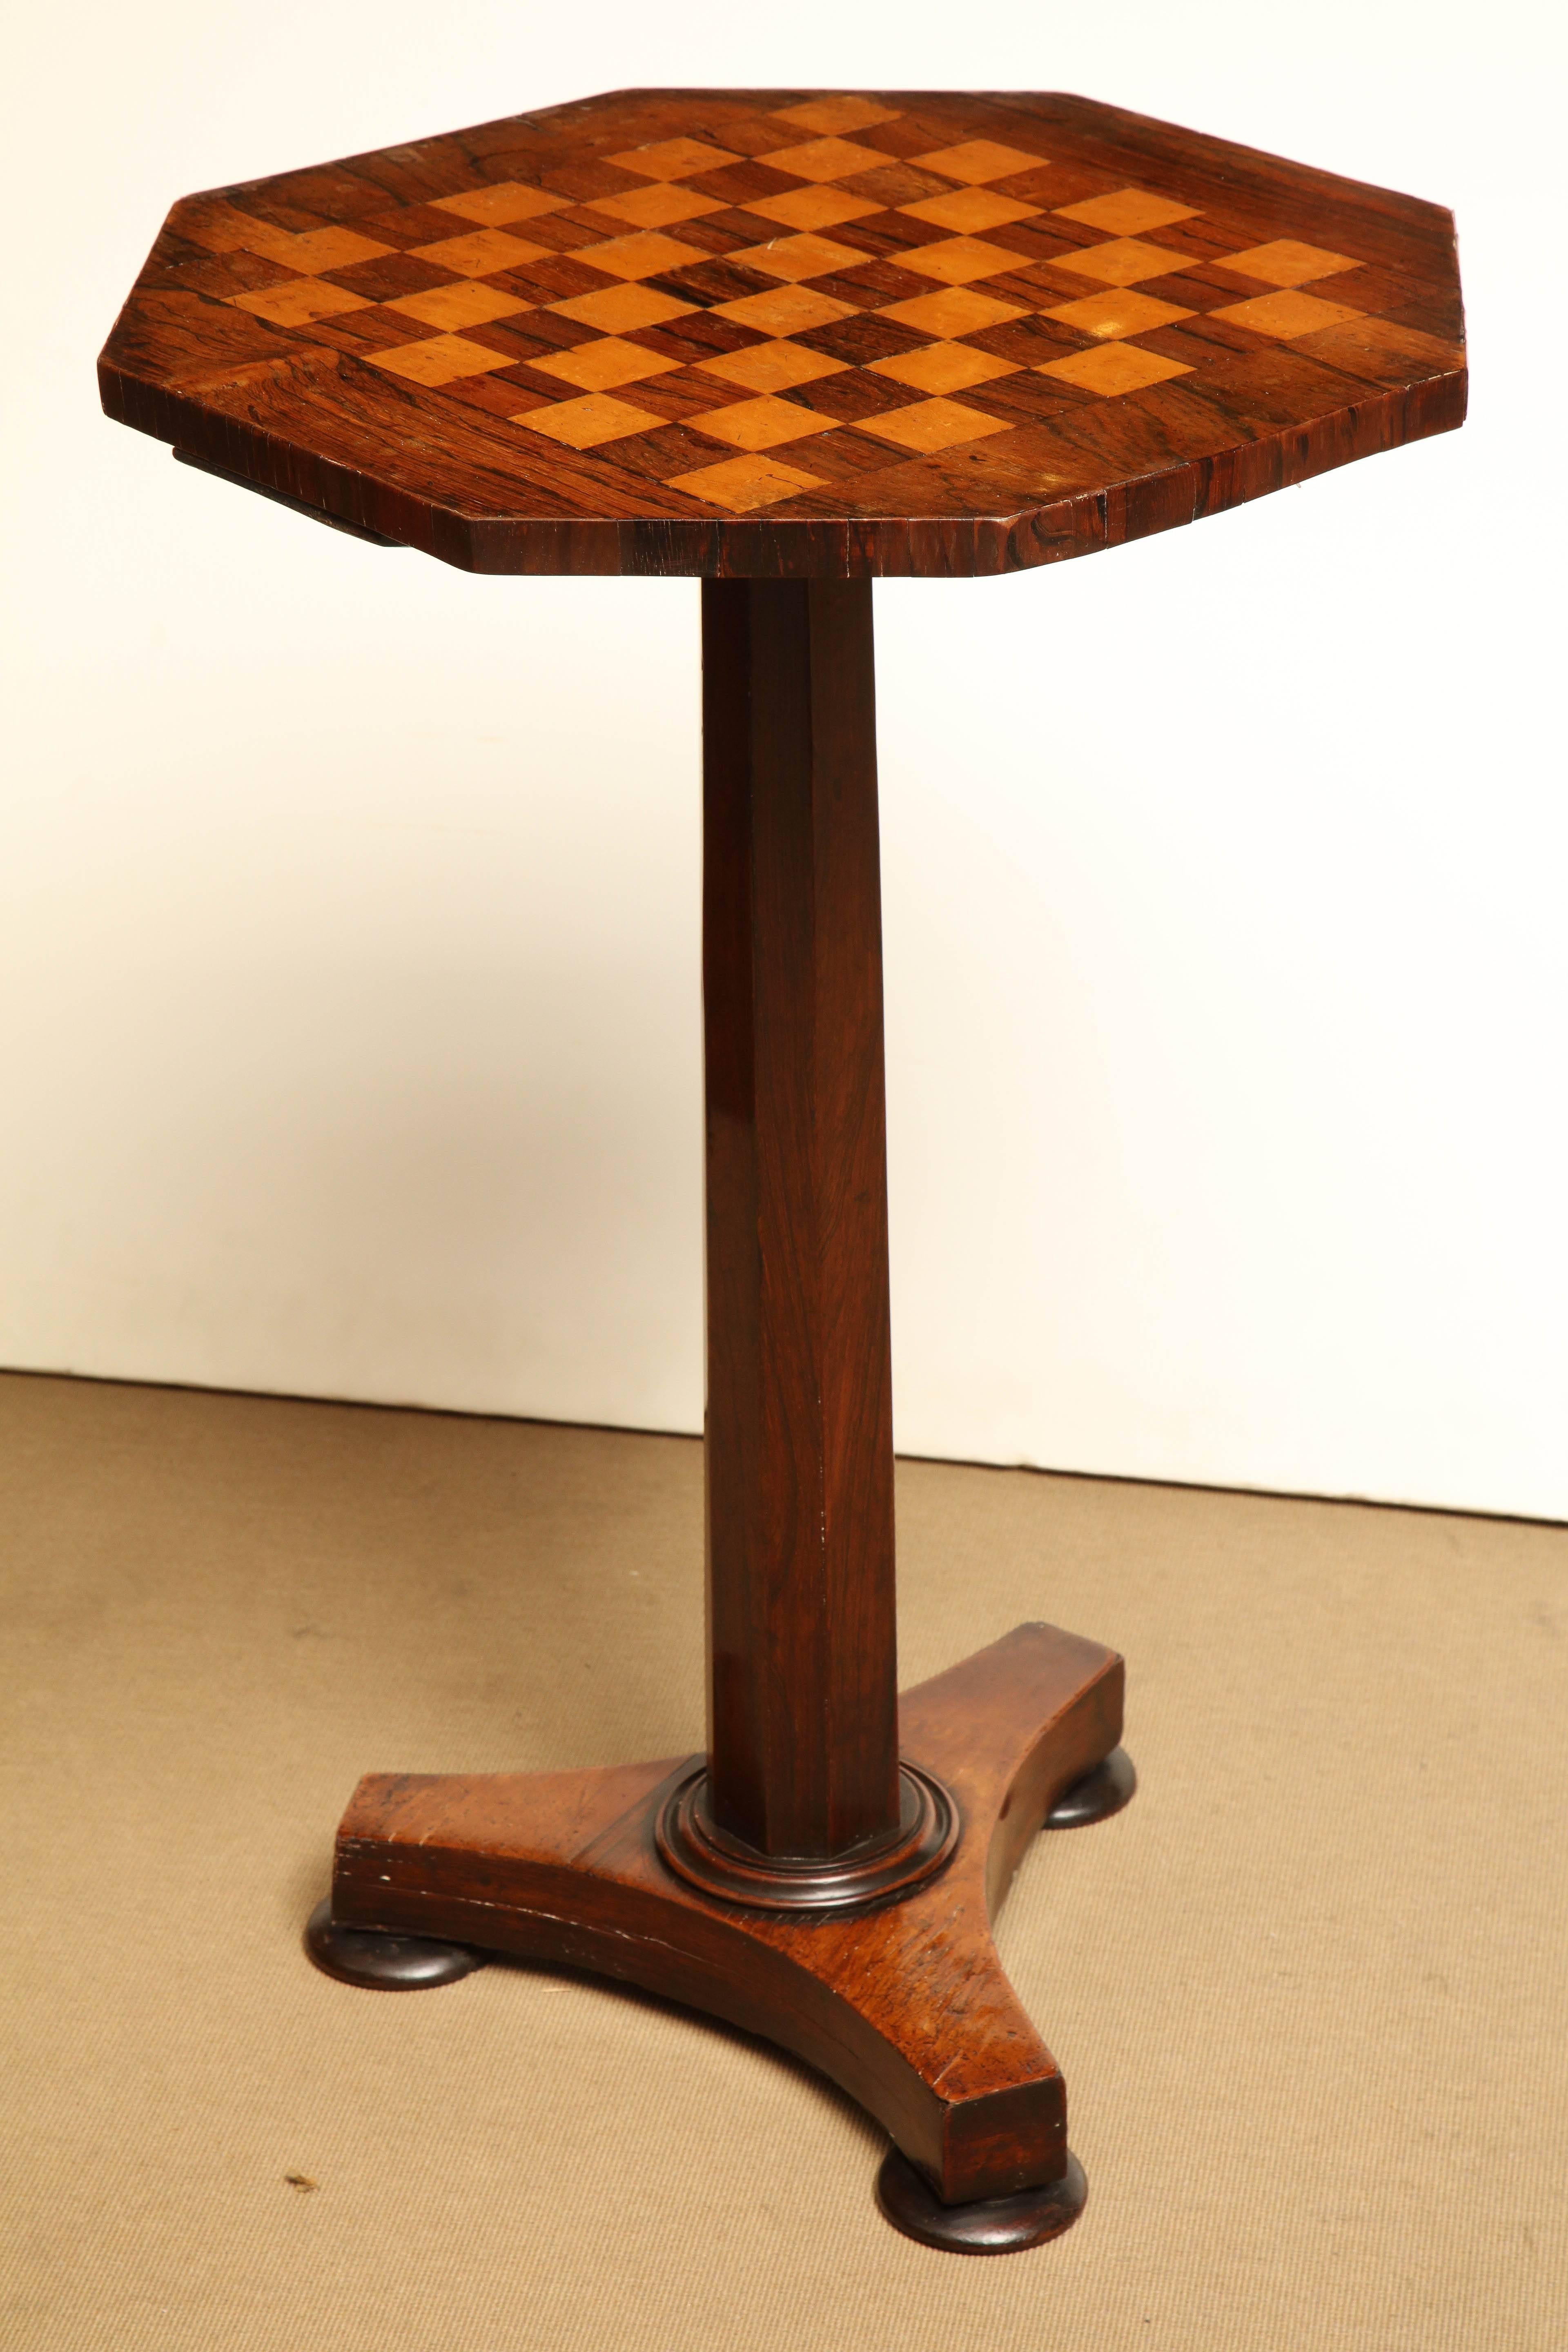 Mid-19th century English octagonal table with checkerboard top.